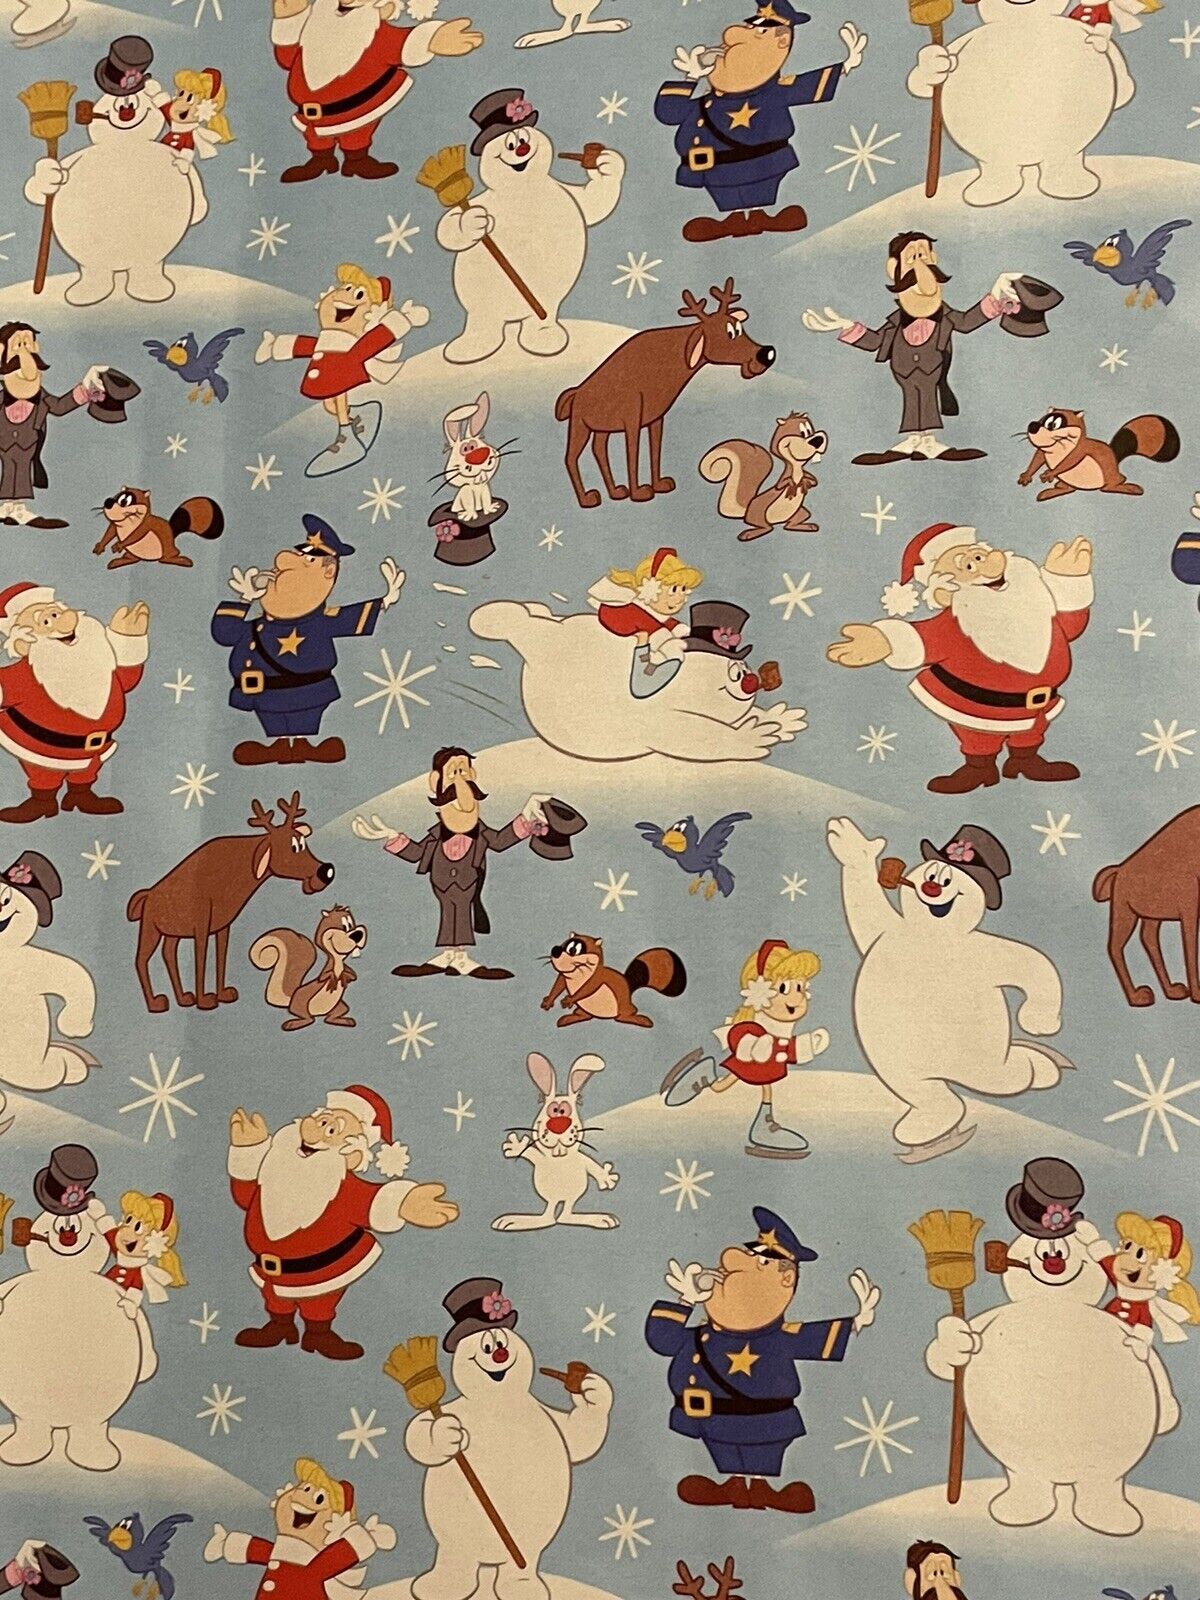 Frosty The Snowman Christmas Karen Gift Wrapping Paper 2 Yard FOLDED Decoupage